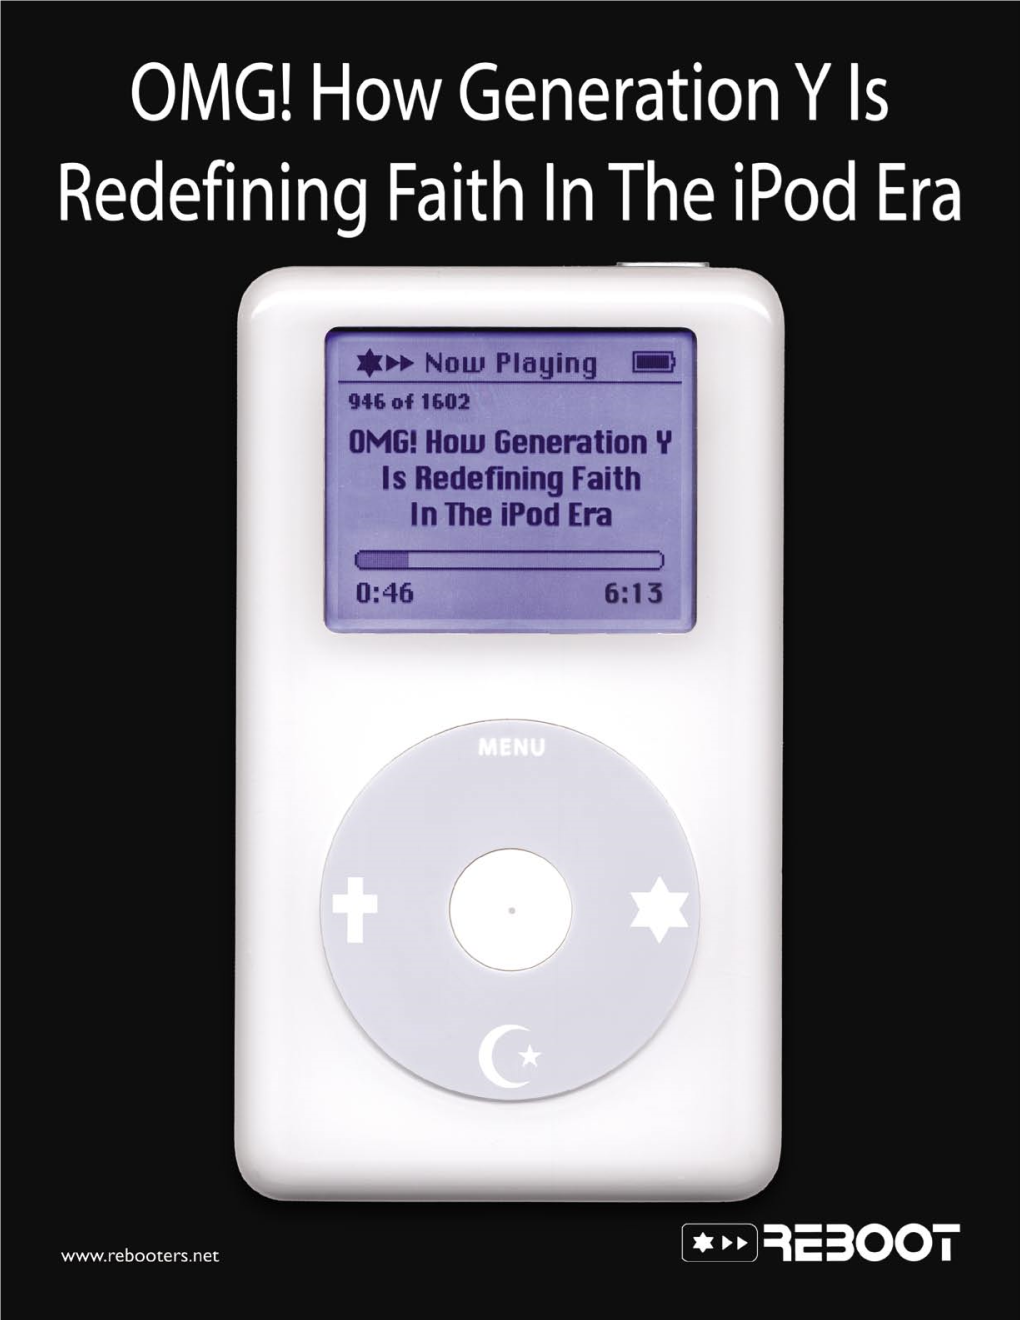 How Generation Y Is Redefining Faith in the Ipod